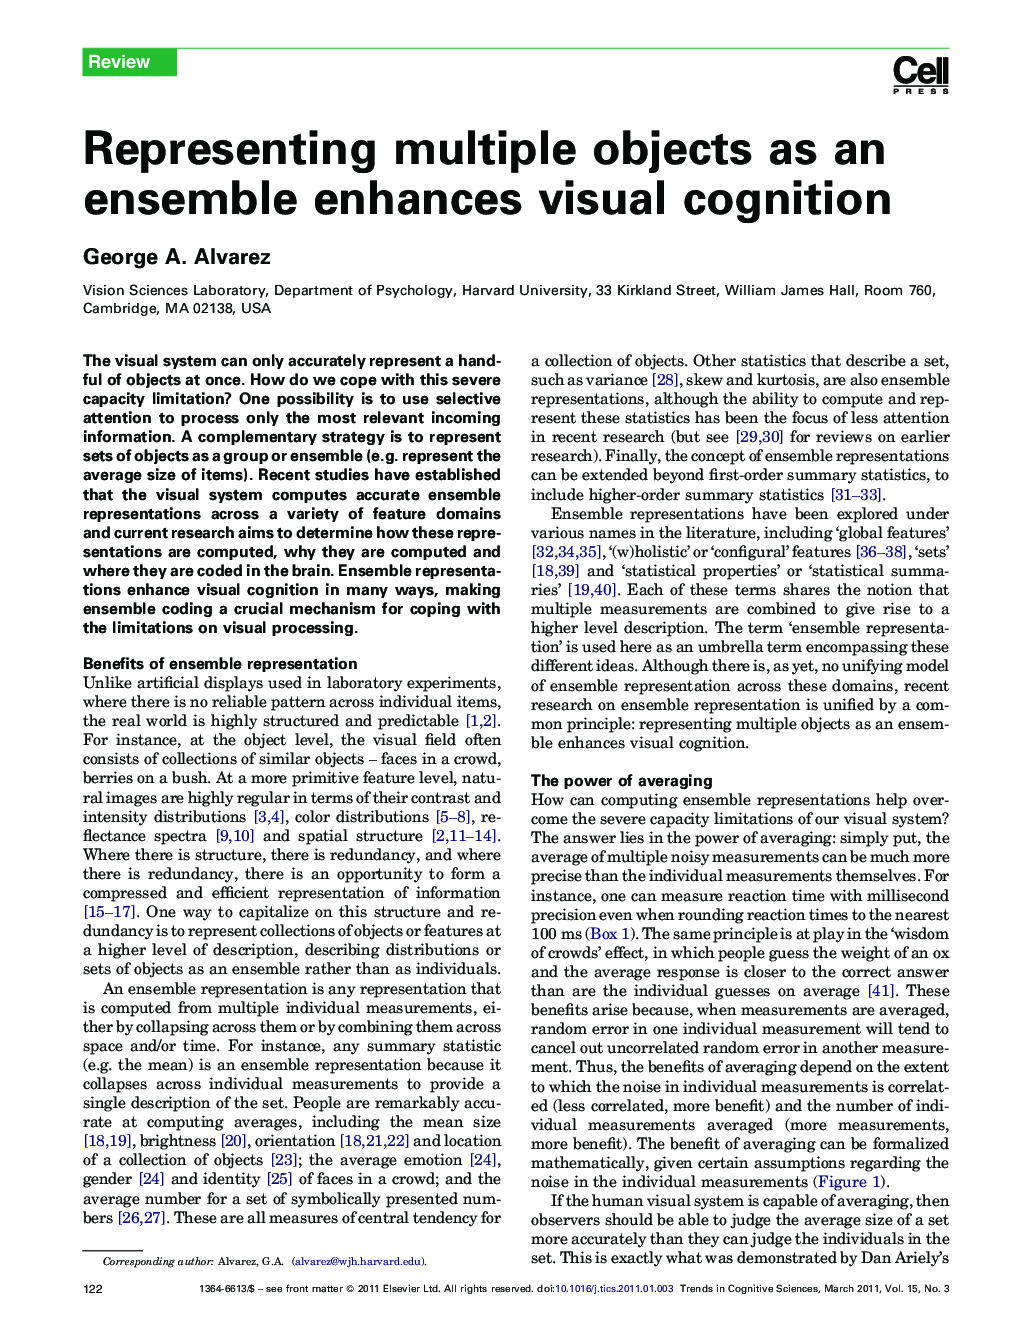 Representing multiple objects as an ensemble enhances visual cognition